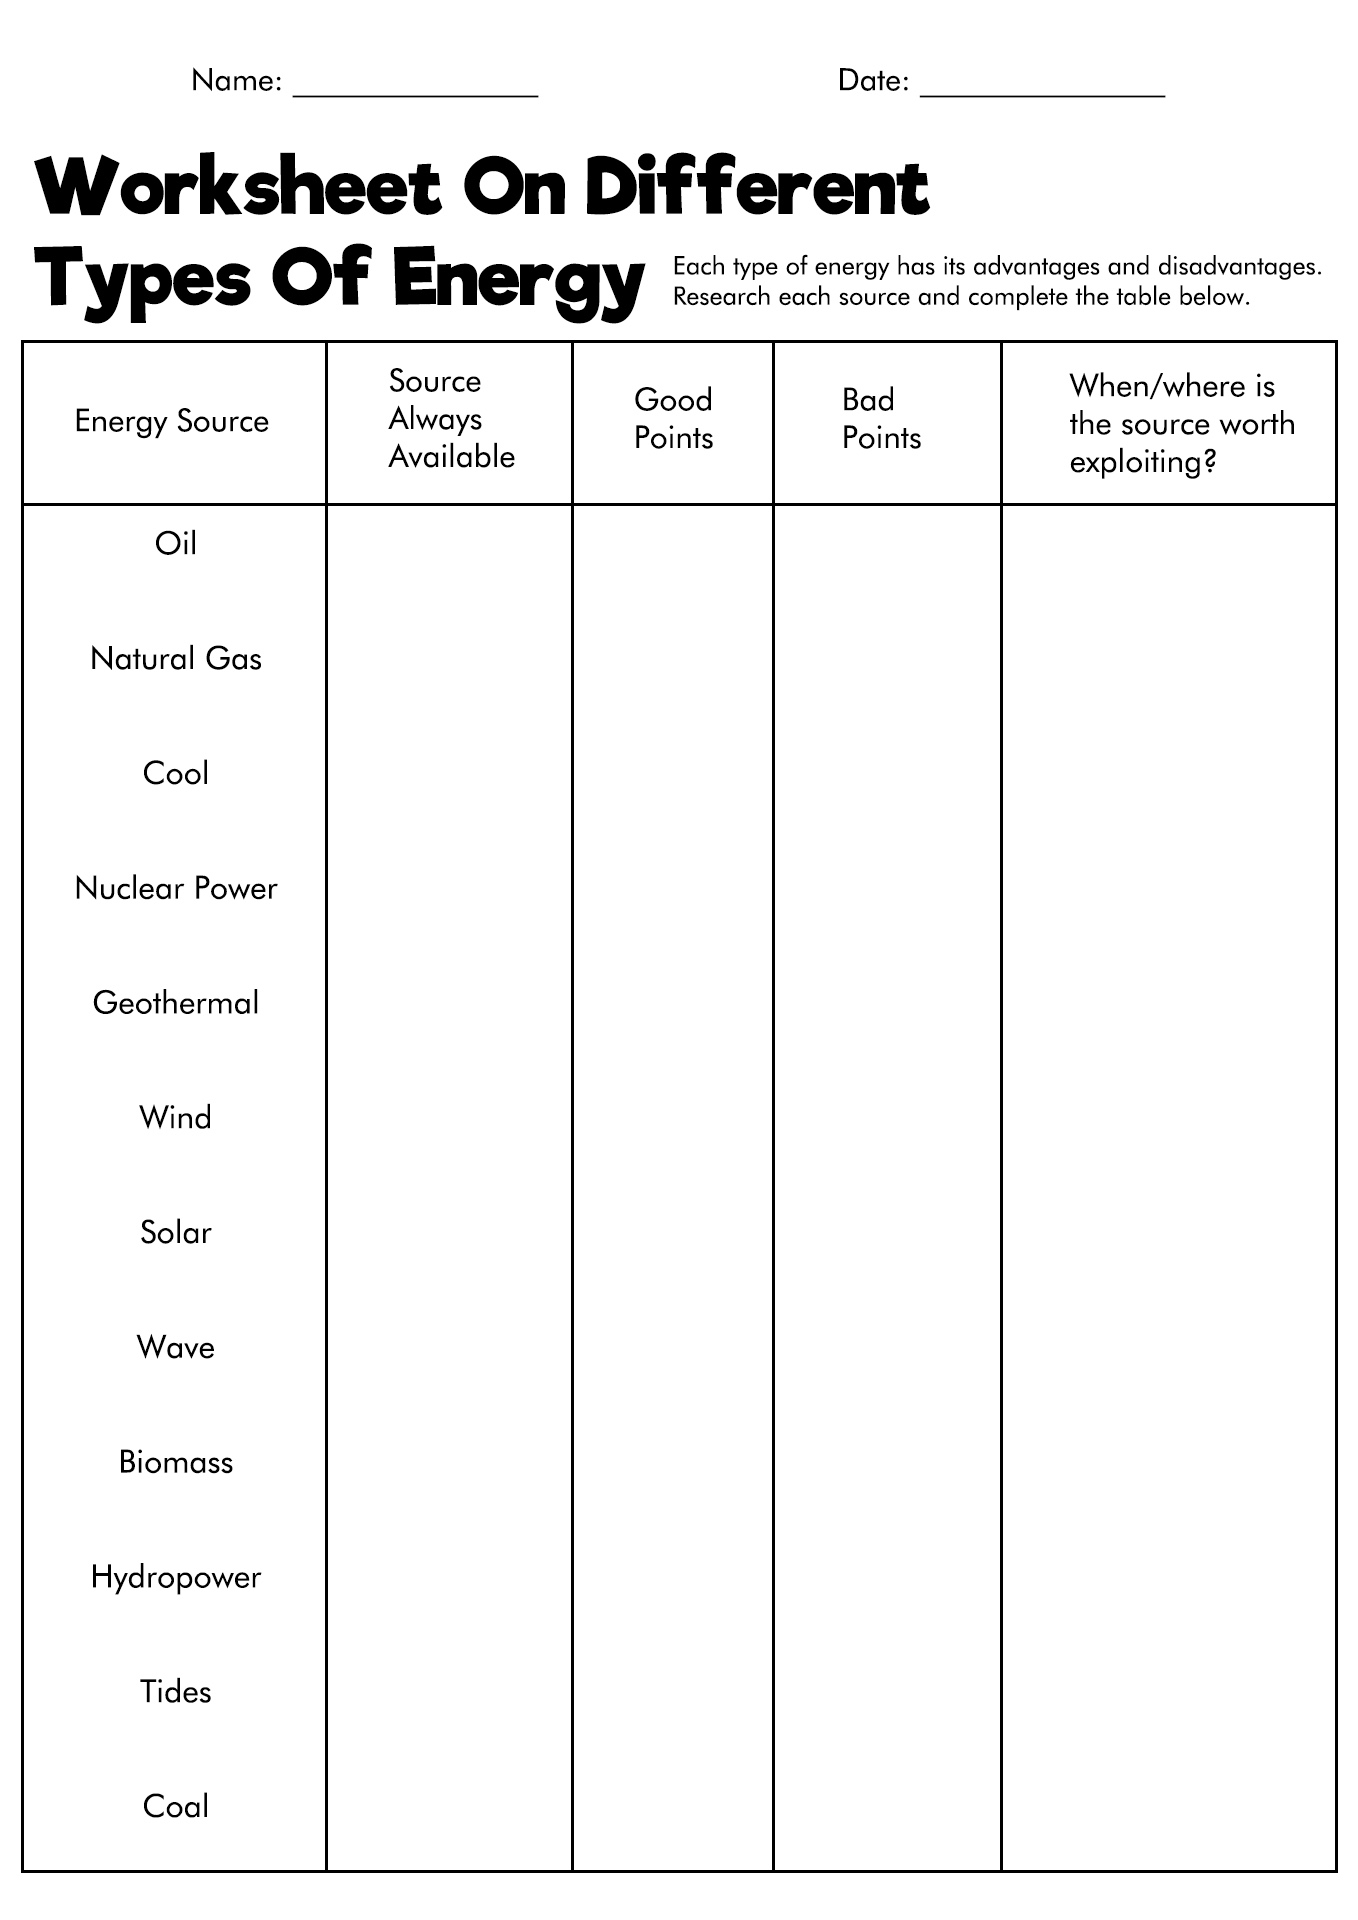 11 Images of Science Heat Energy Worksheets With Answer